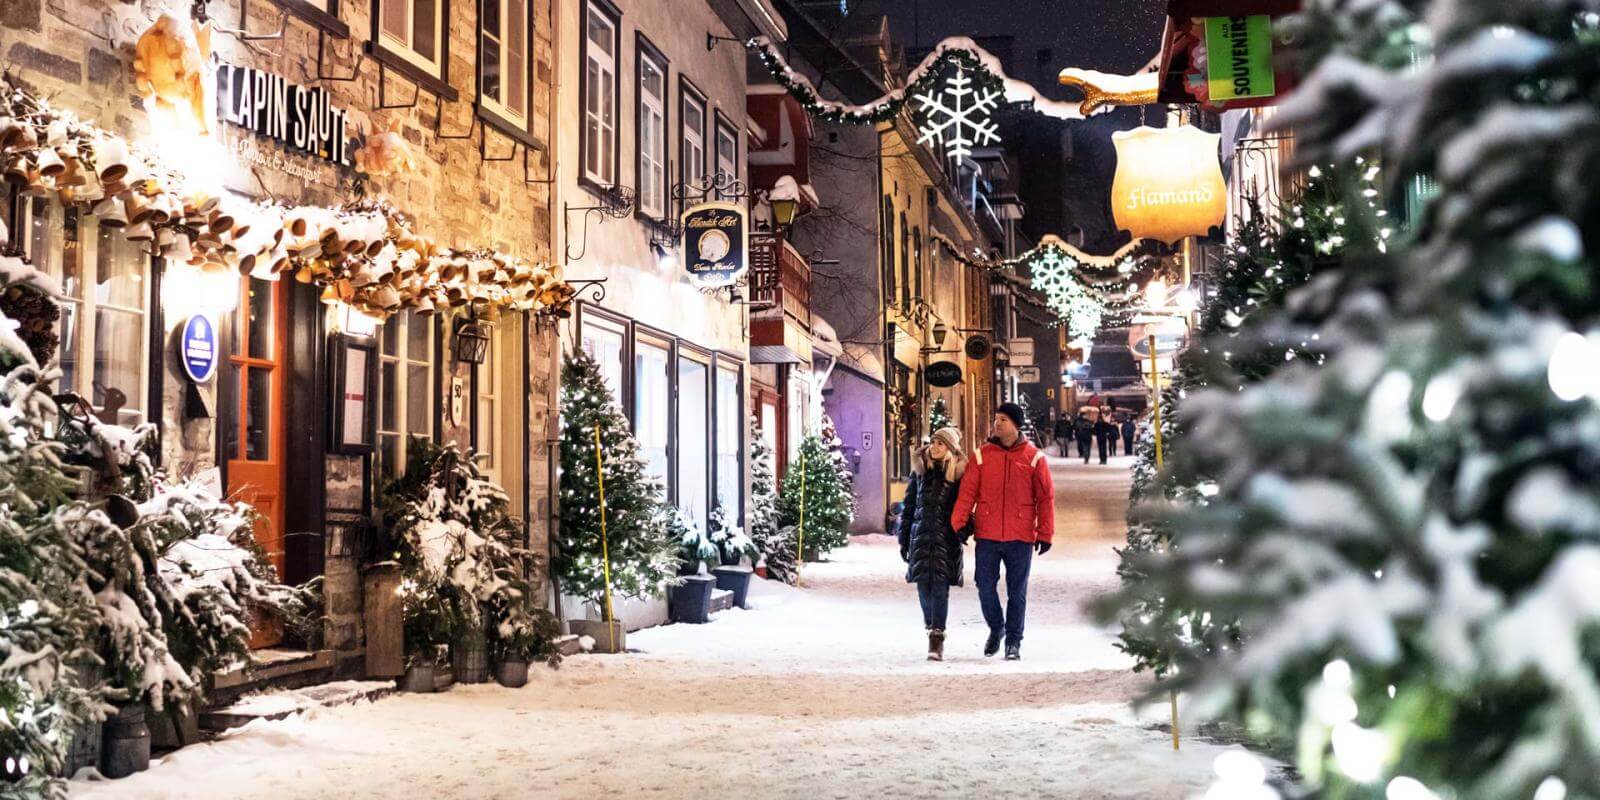 A couple takes a walk in the evening during the holiday season on rue du Petit-Champlain, covered with snow and decorated with illuminated trees.